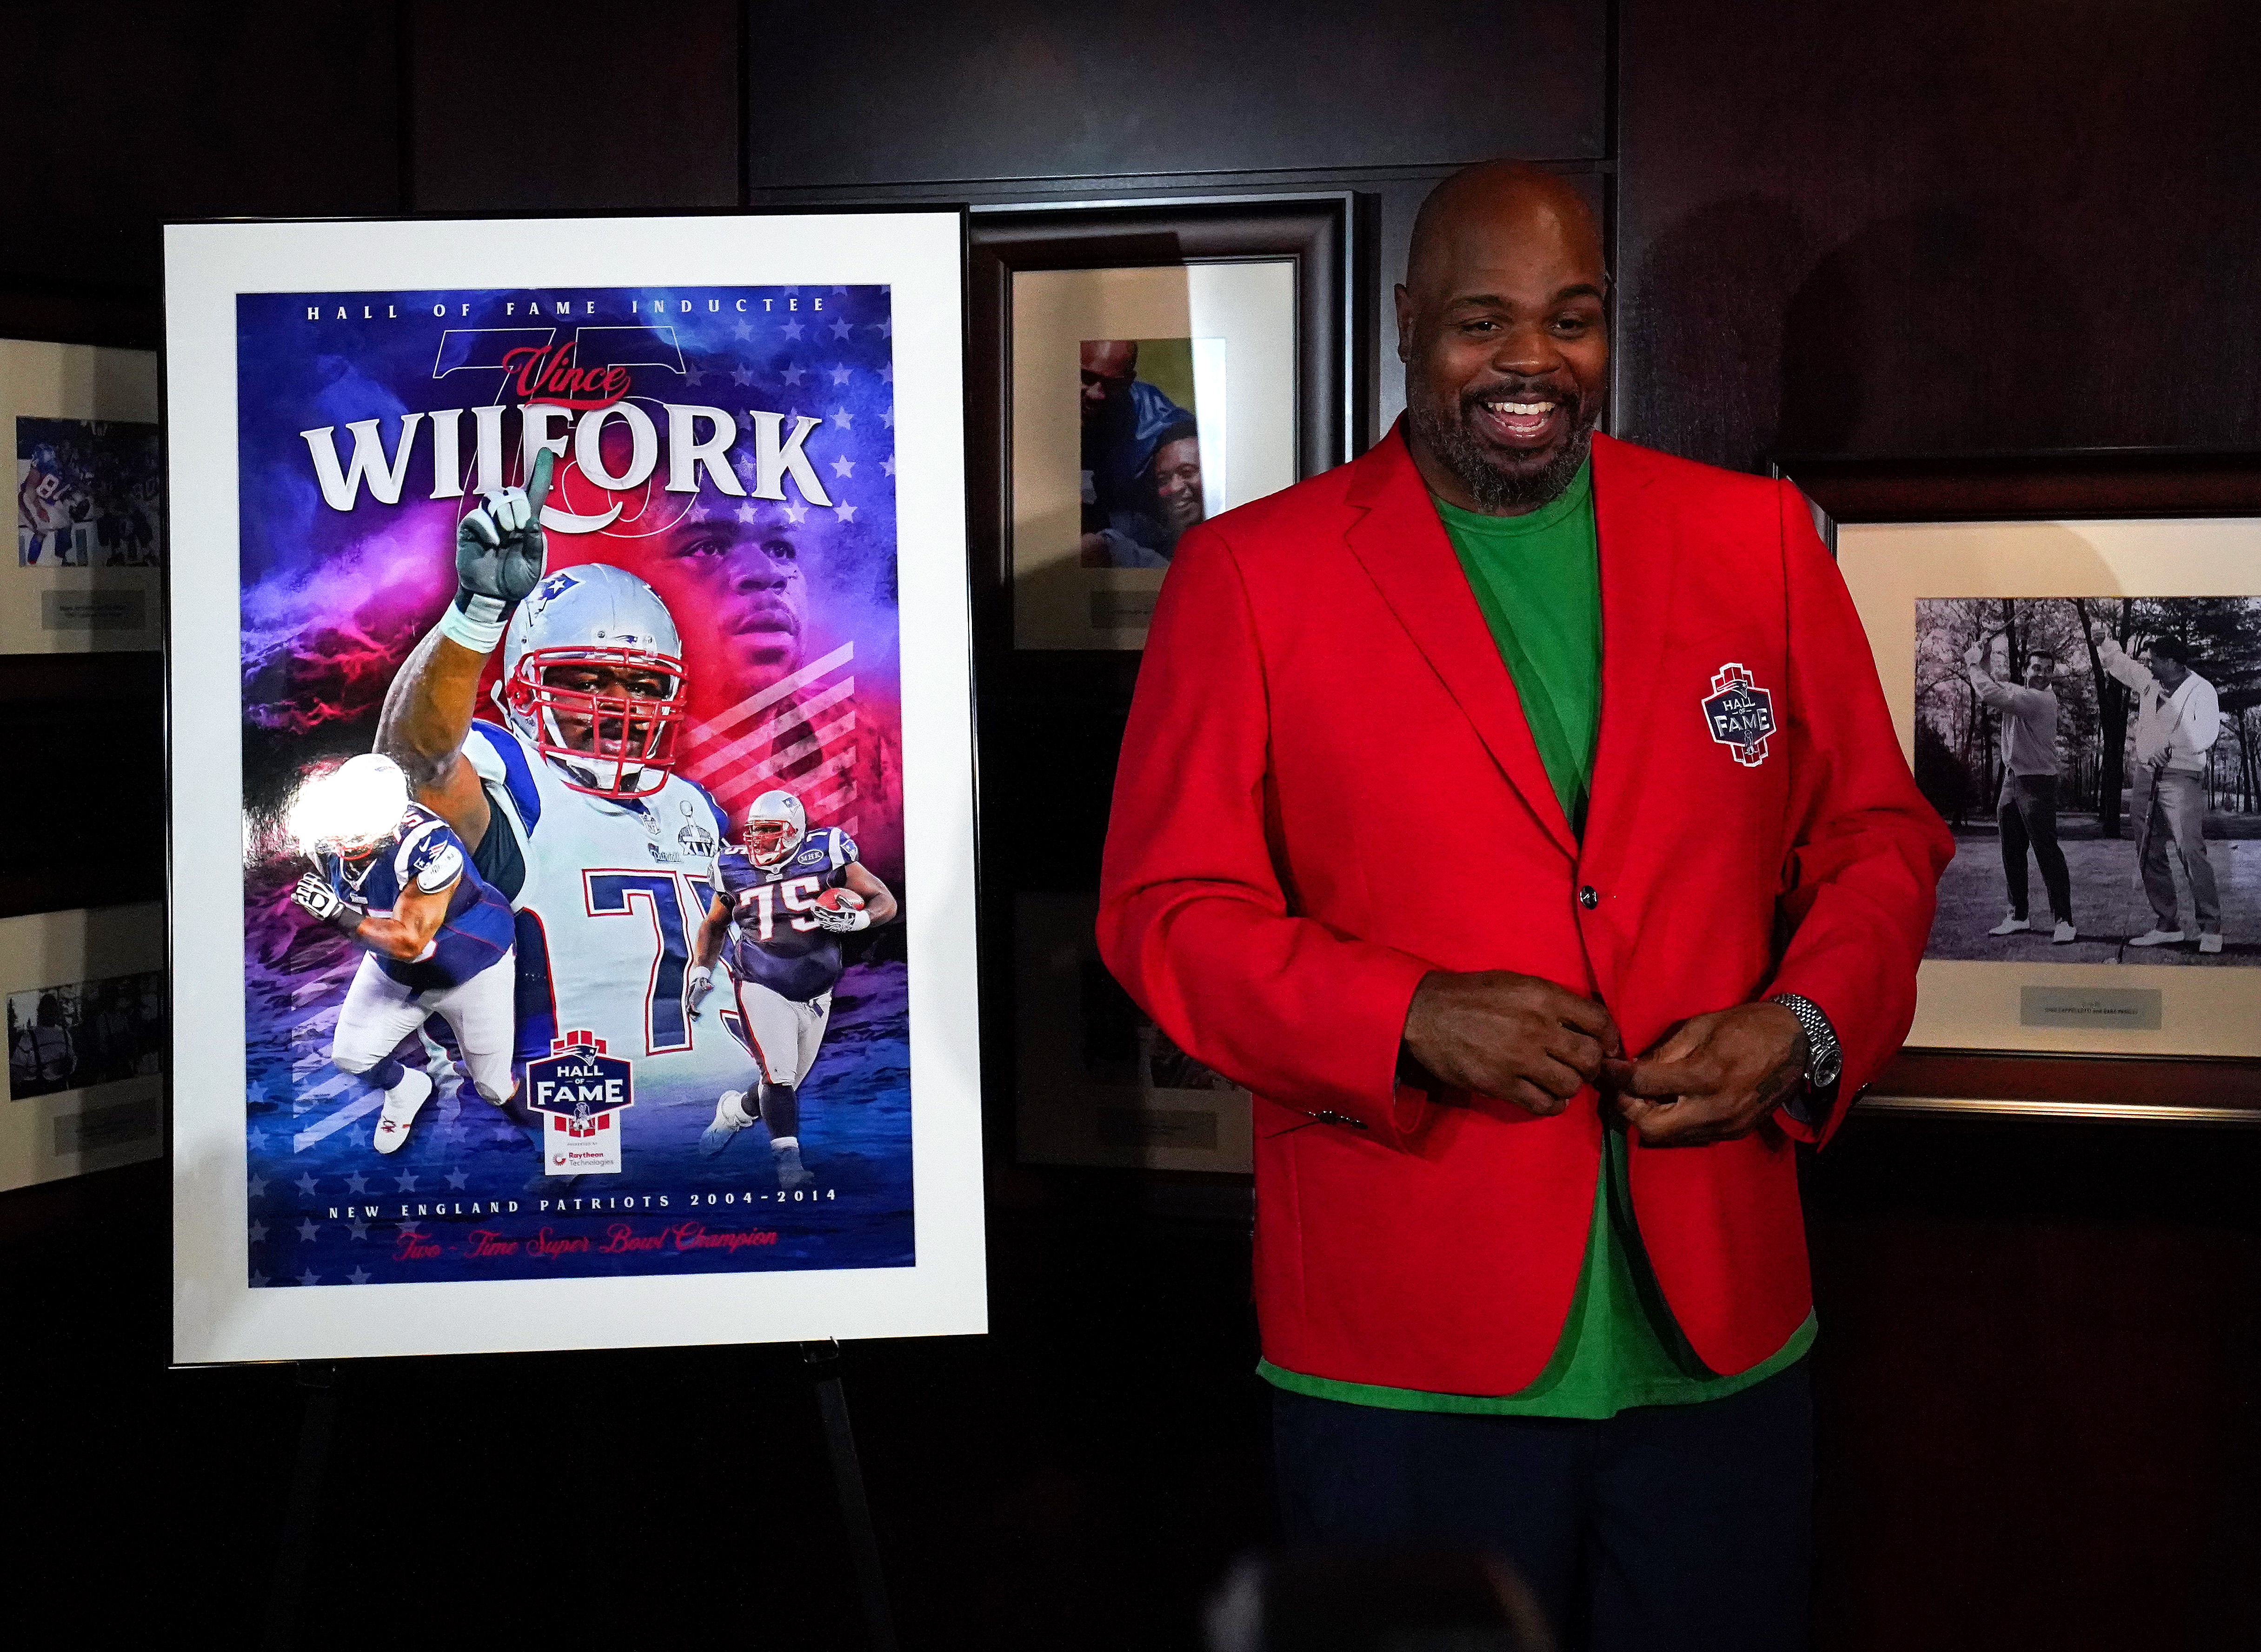 Hall call for Big Vince: Vince Wilfork elected to New England Patriots Hall  of Fame